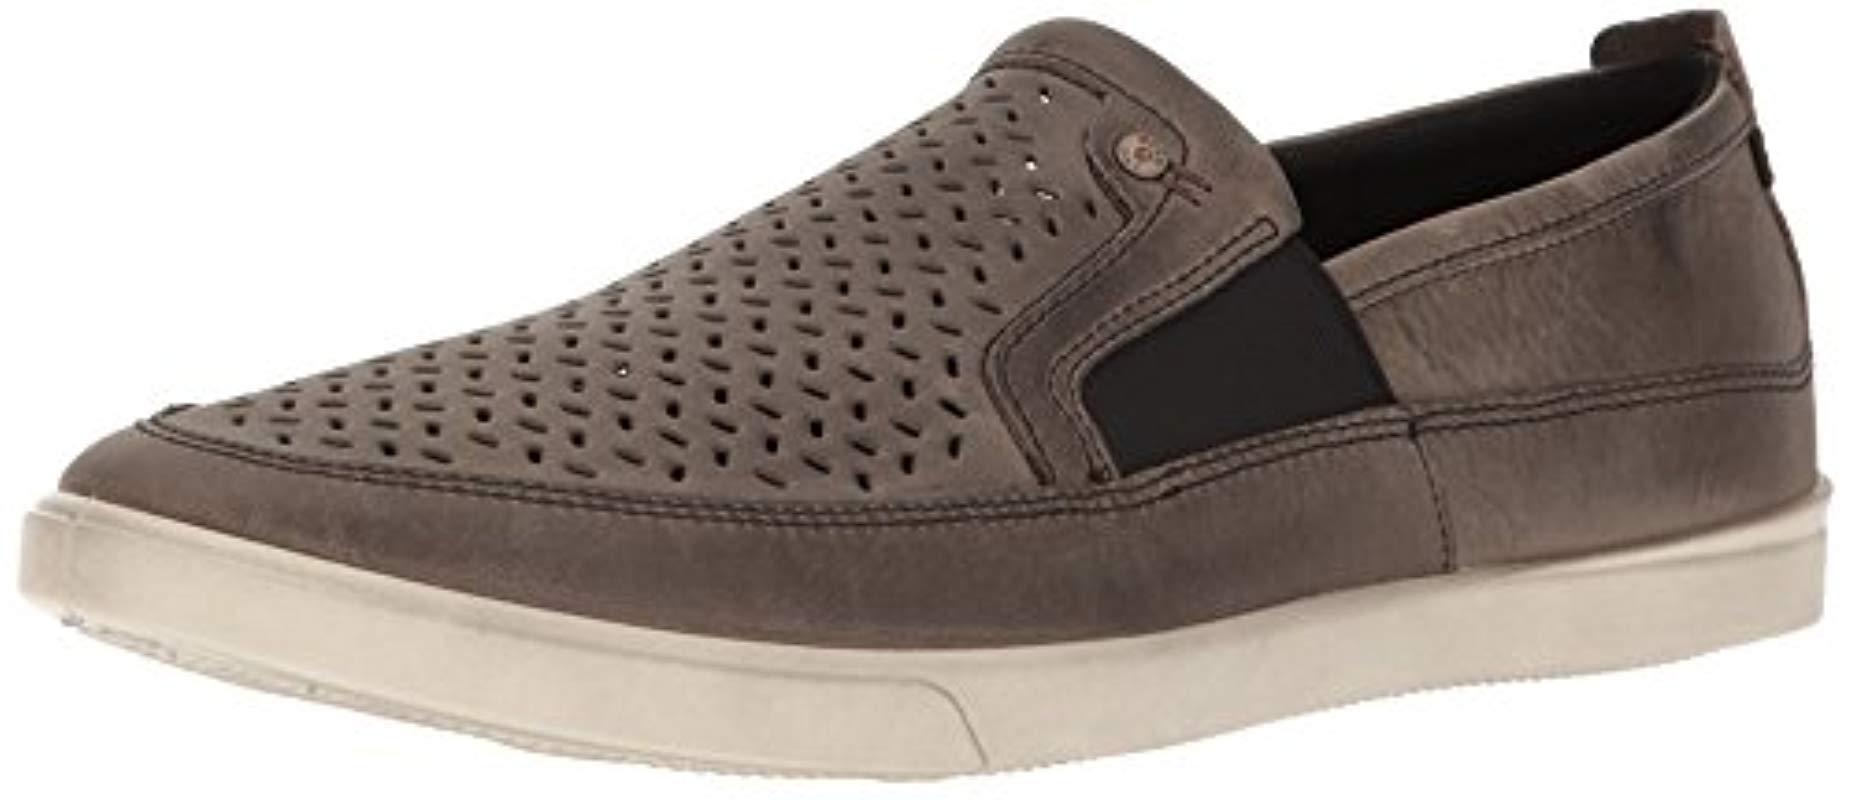 Lyst - Ecco Collin Perforated Slip On Fashion Sneaker for Men